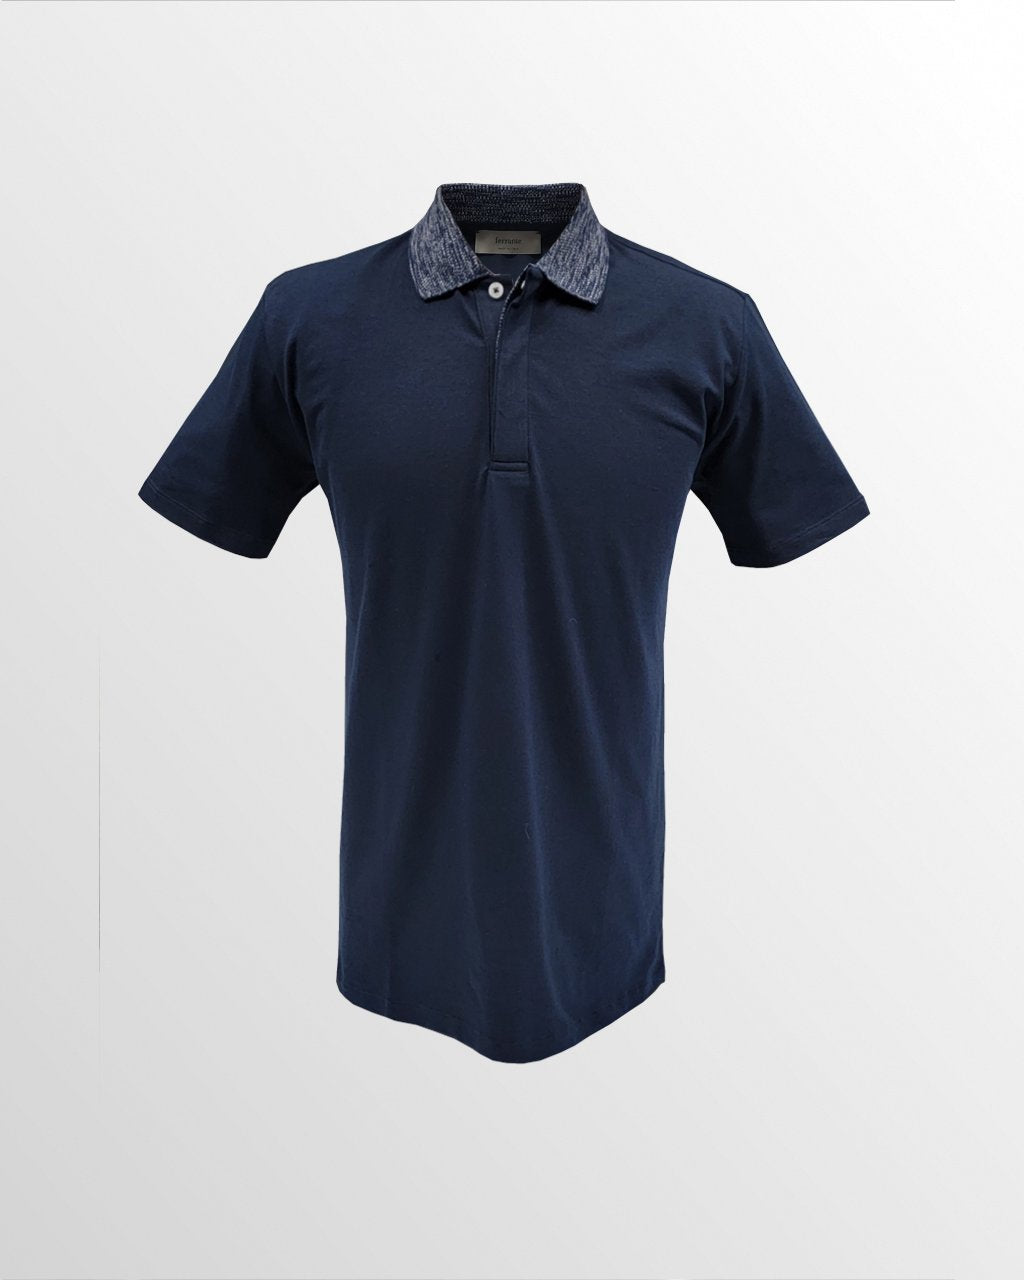 Ferrante Polo in Navy with Knit Contrast Collar